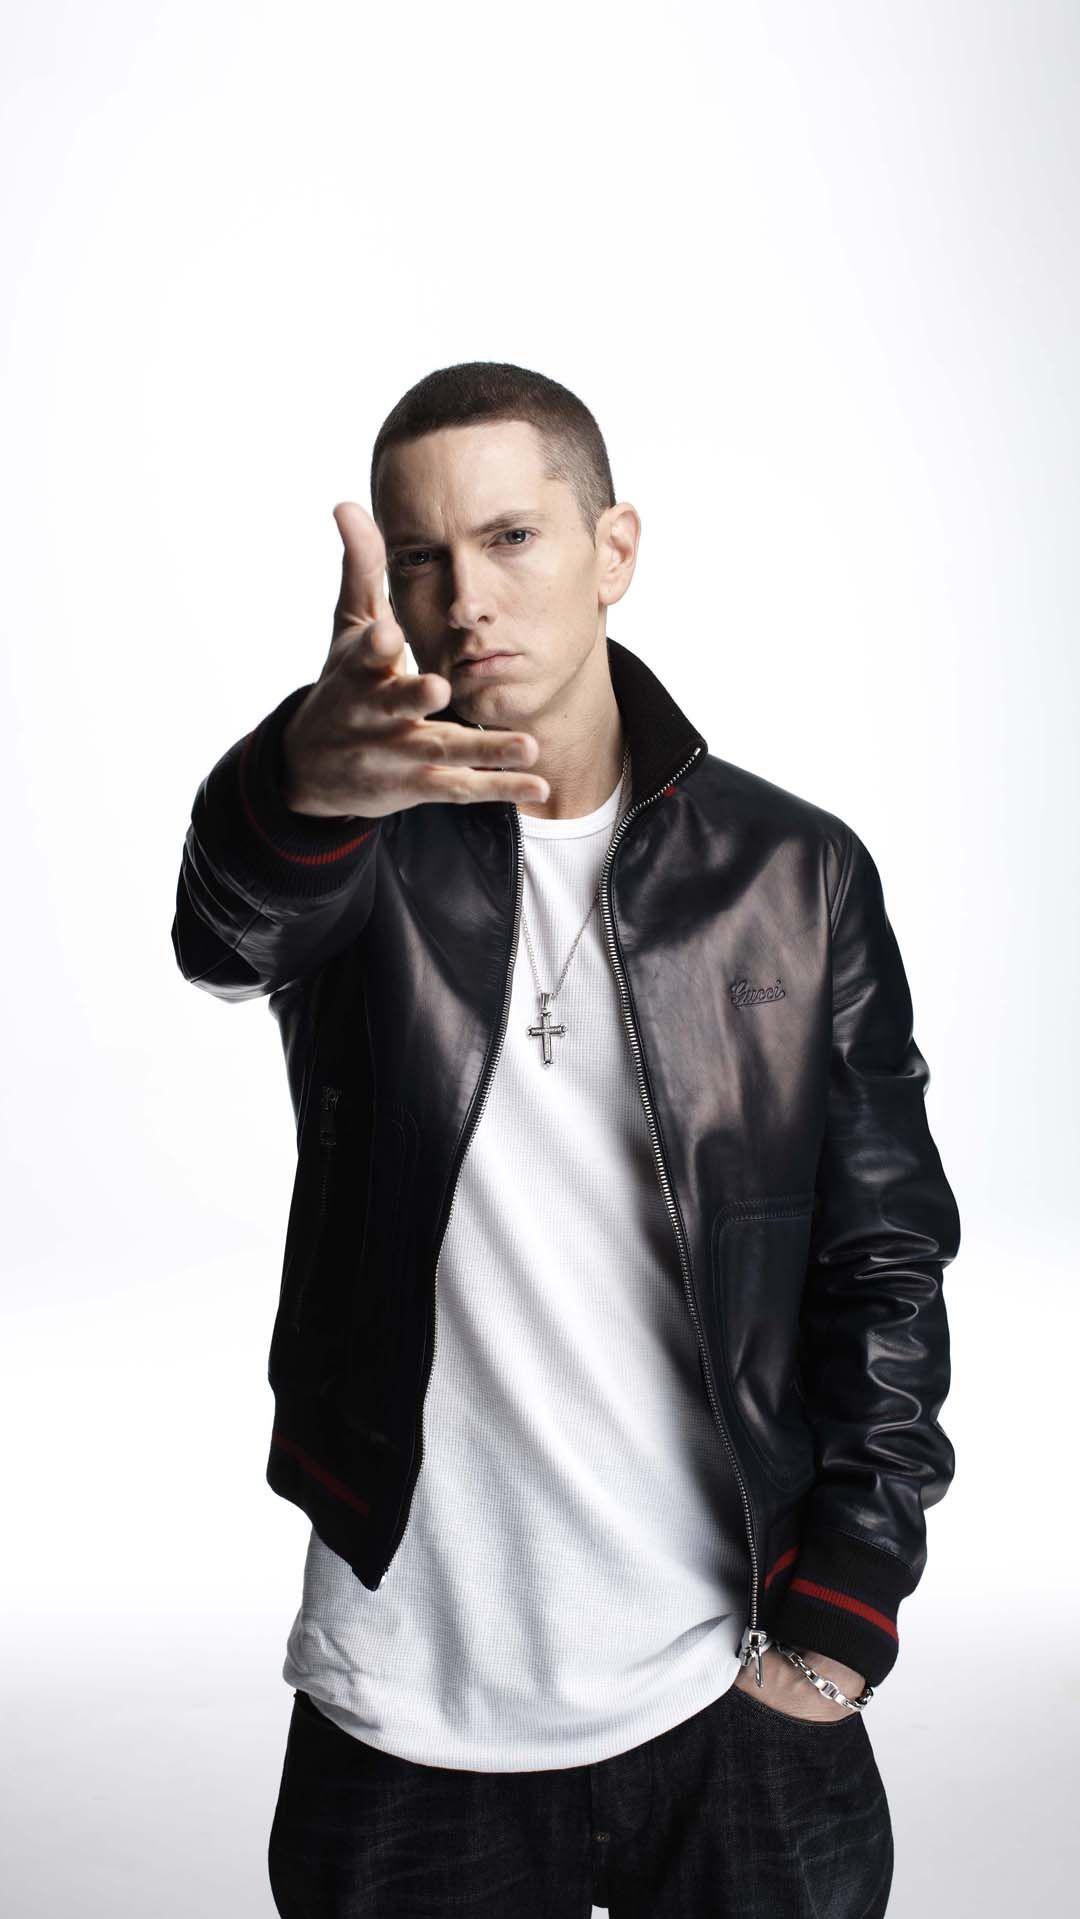 Download Free eminem hd wallpapers for mobile devices Wallpapers